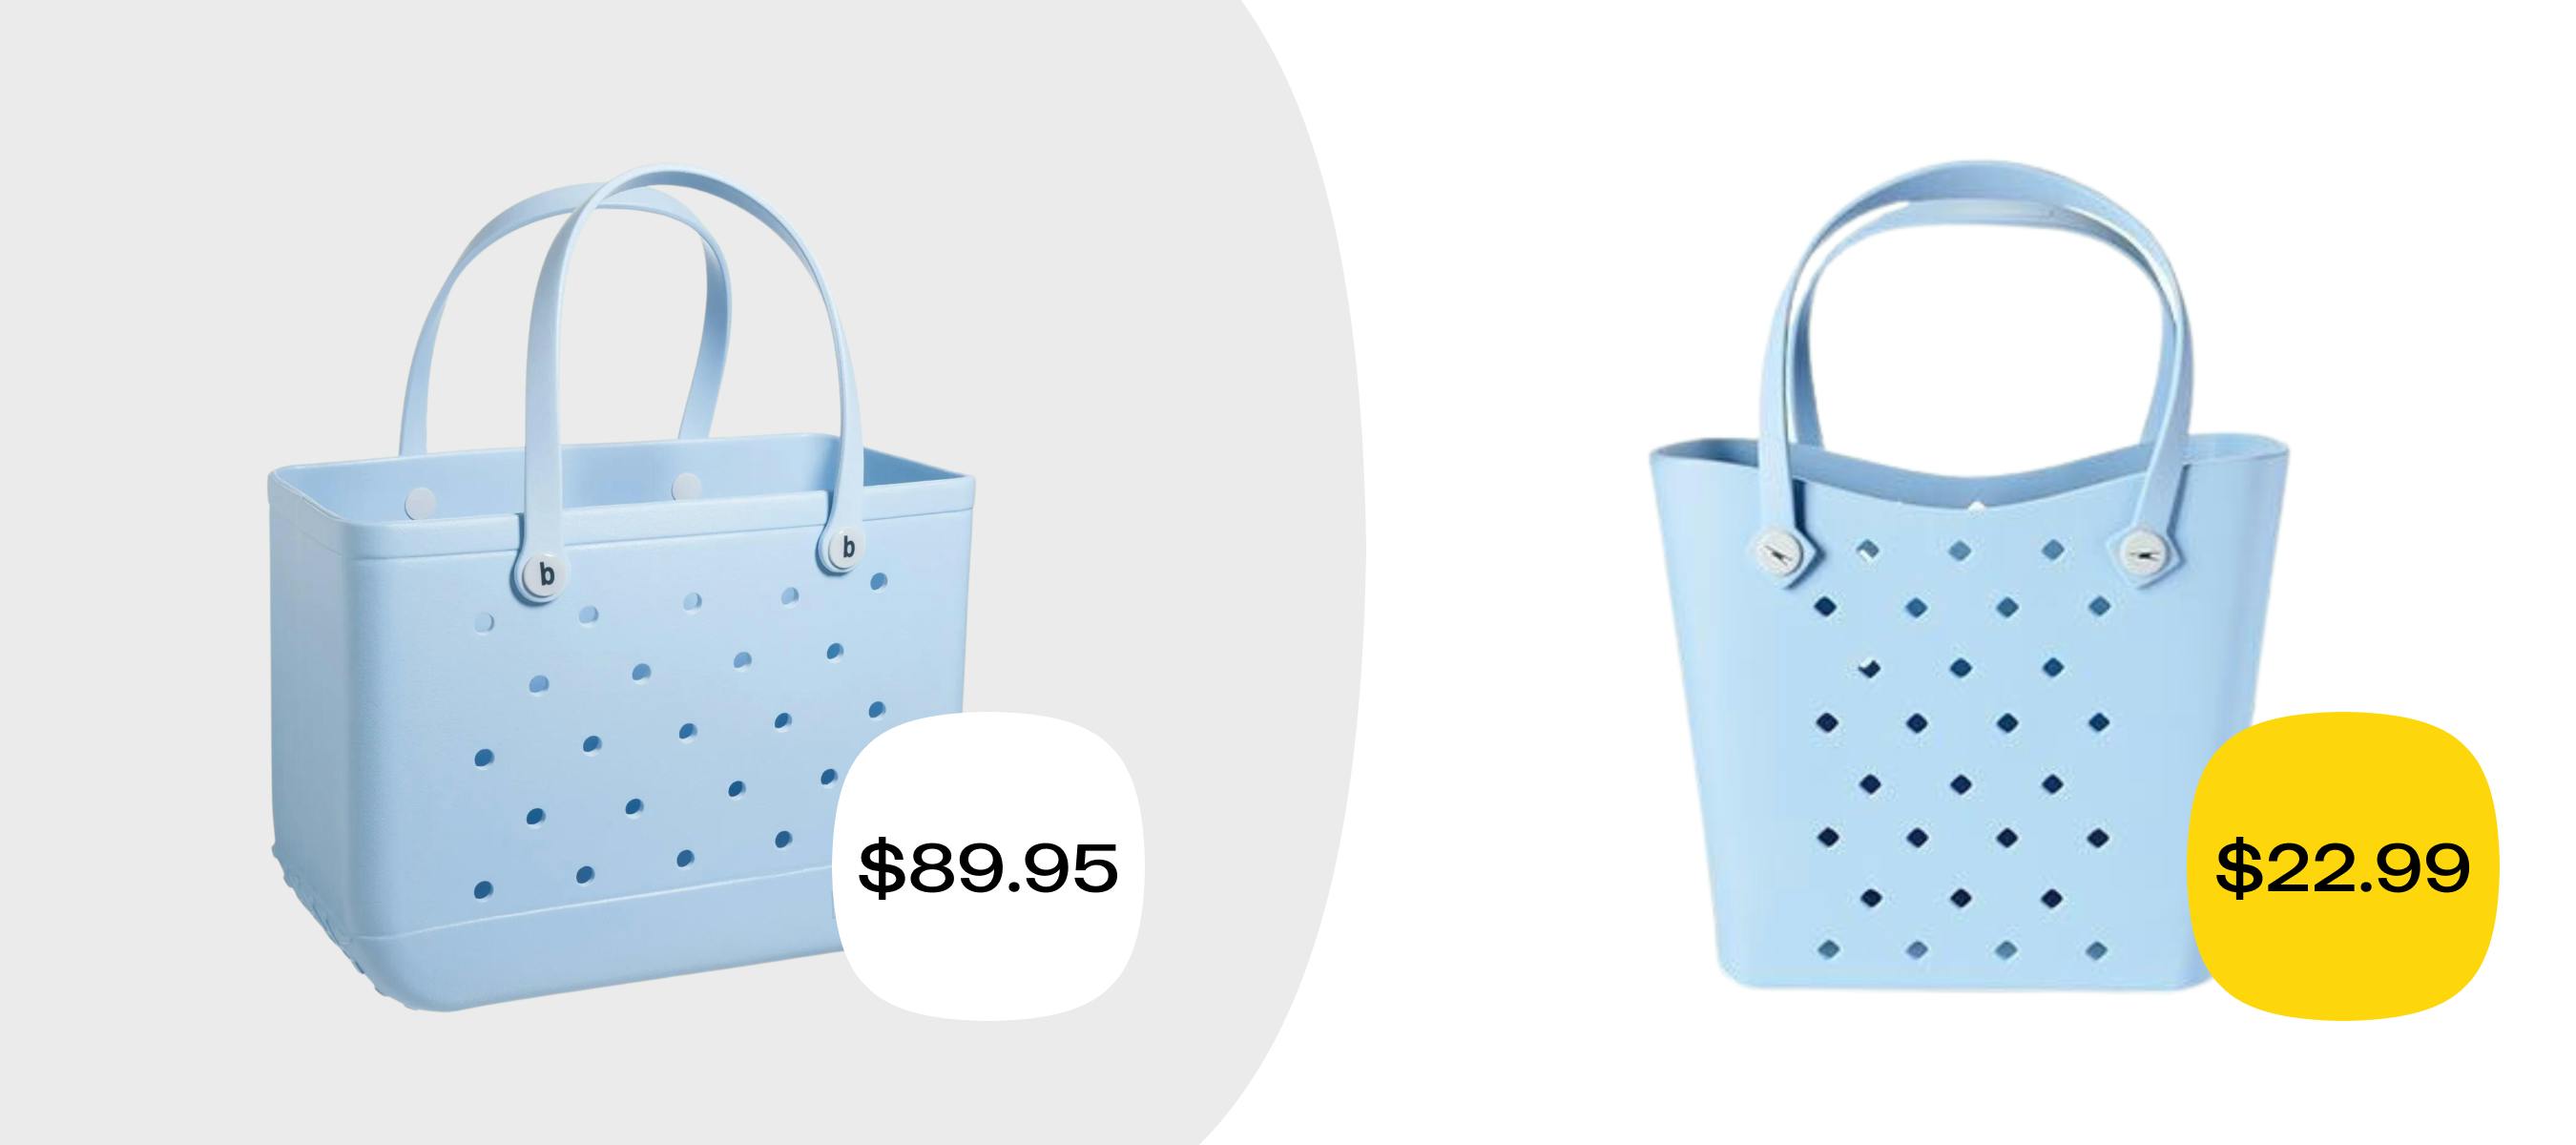 9 Cheap Bogg Bag Dupes That Are Cheaper Than the Original